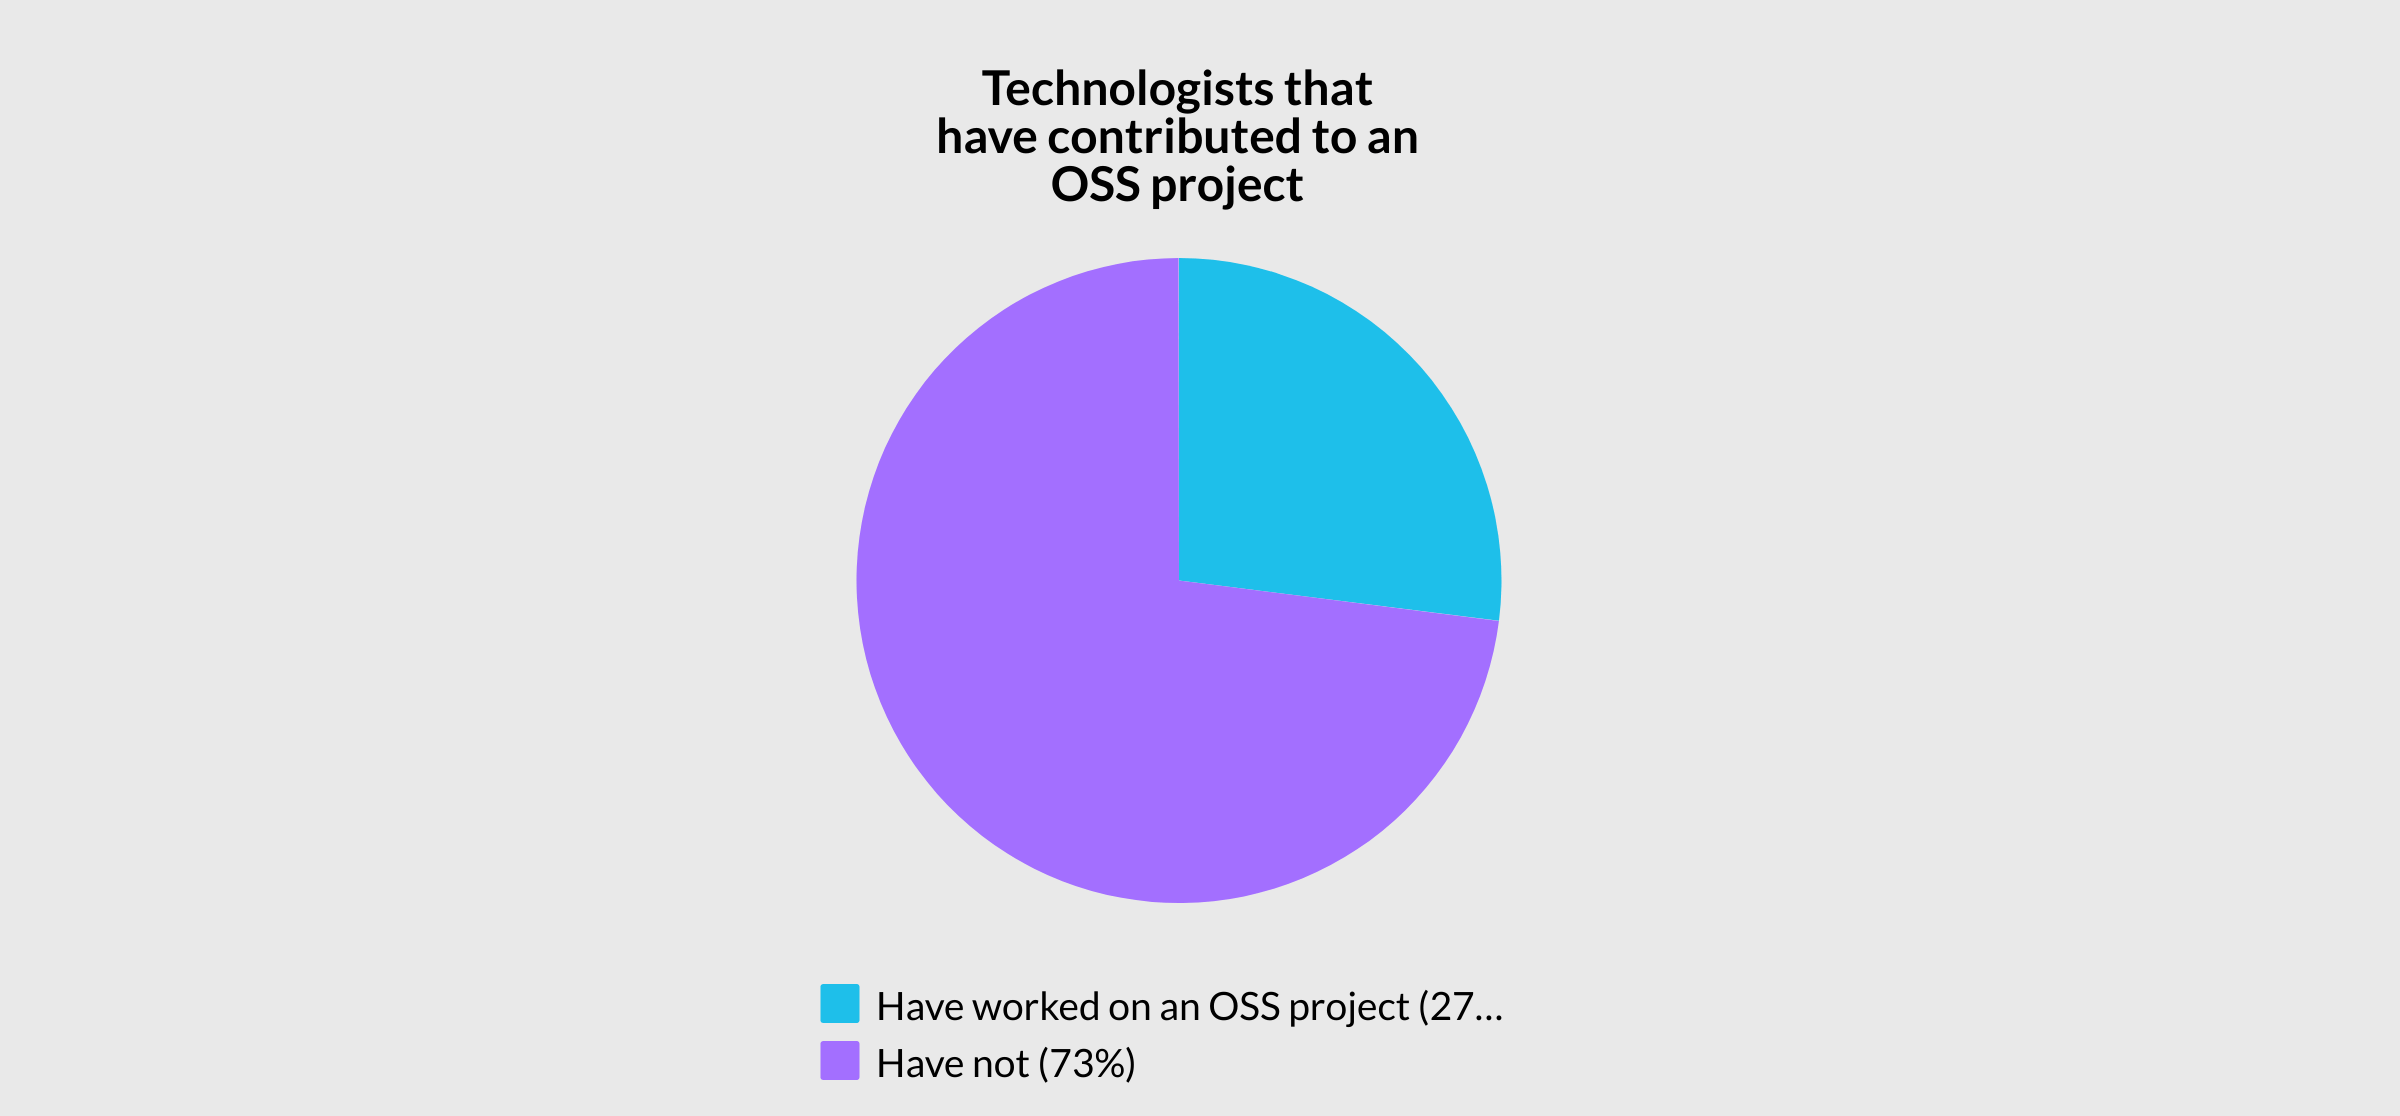 Pie chart shorting breakdown of technologist who have and have not contributed to open source